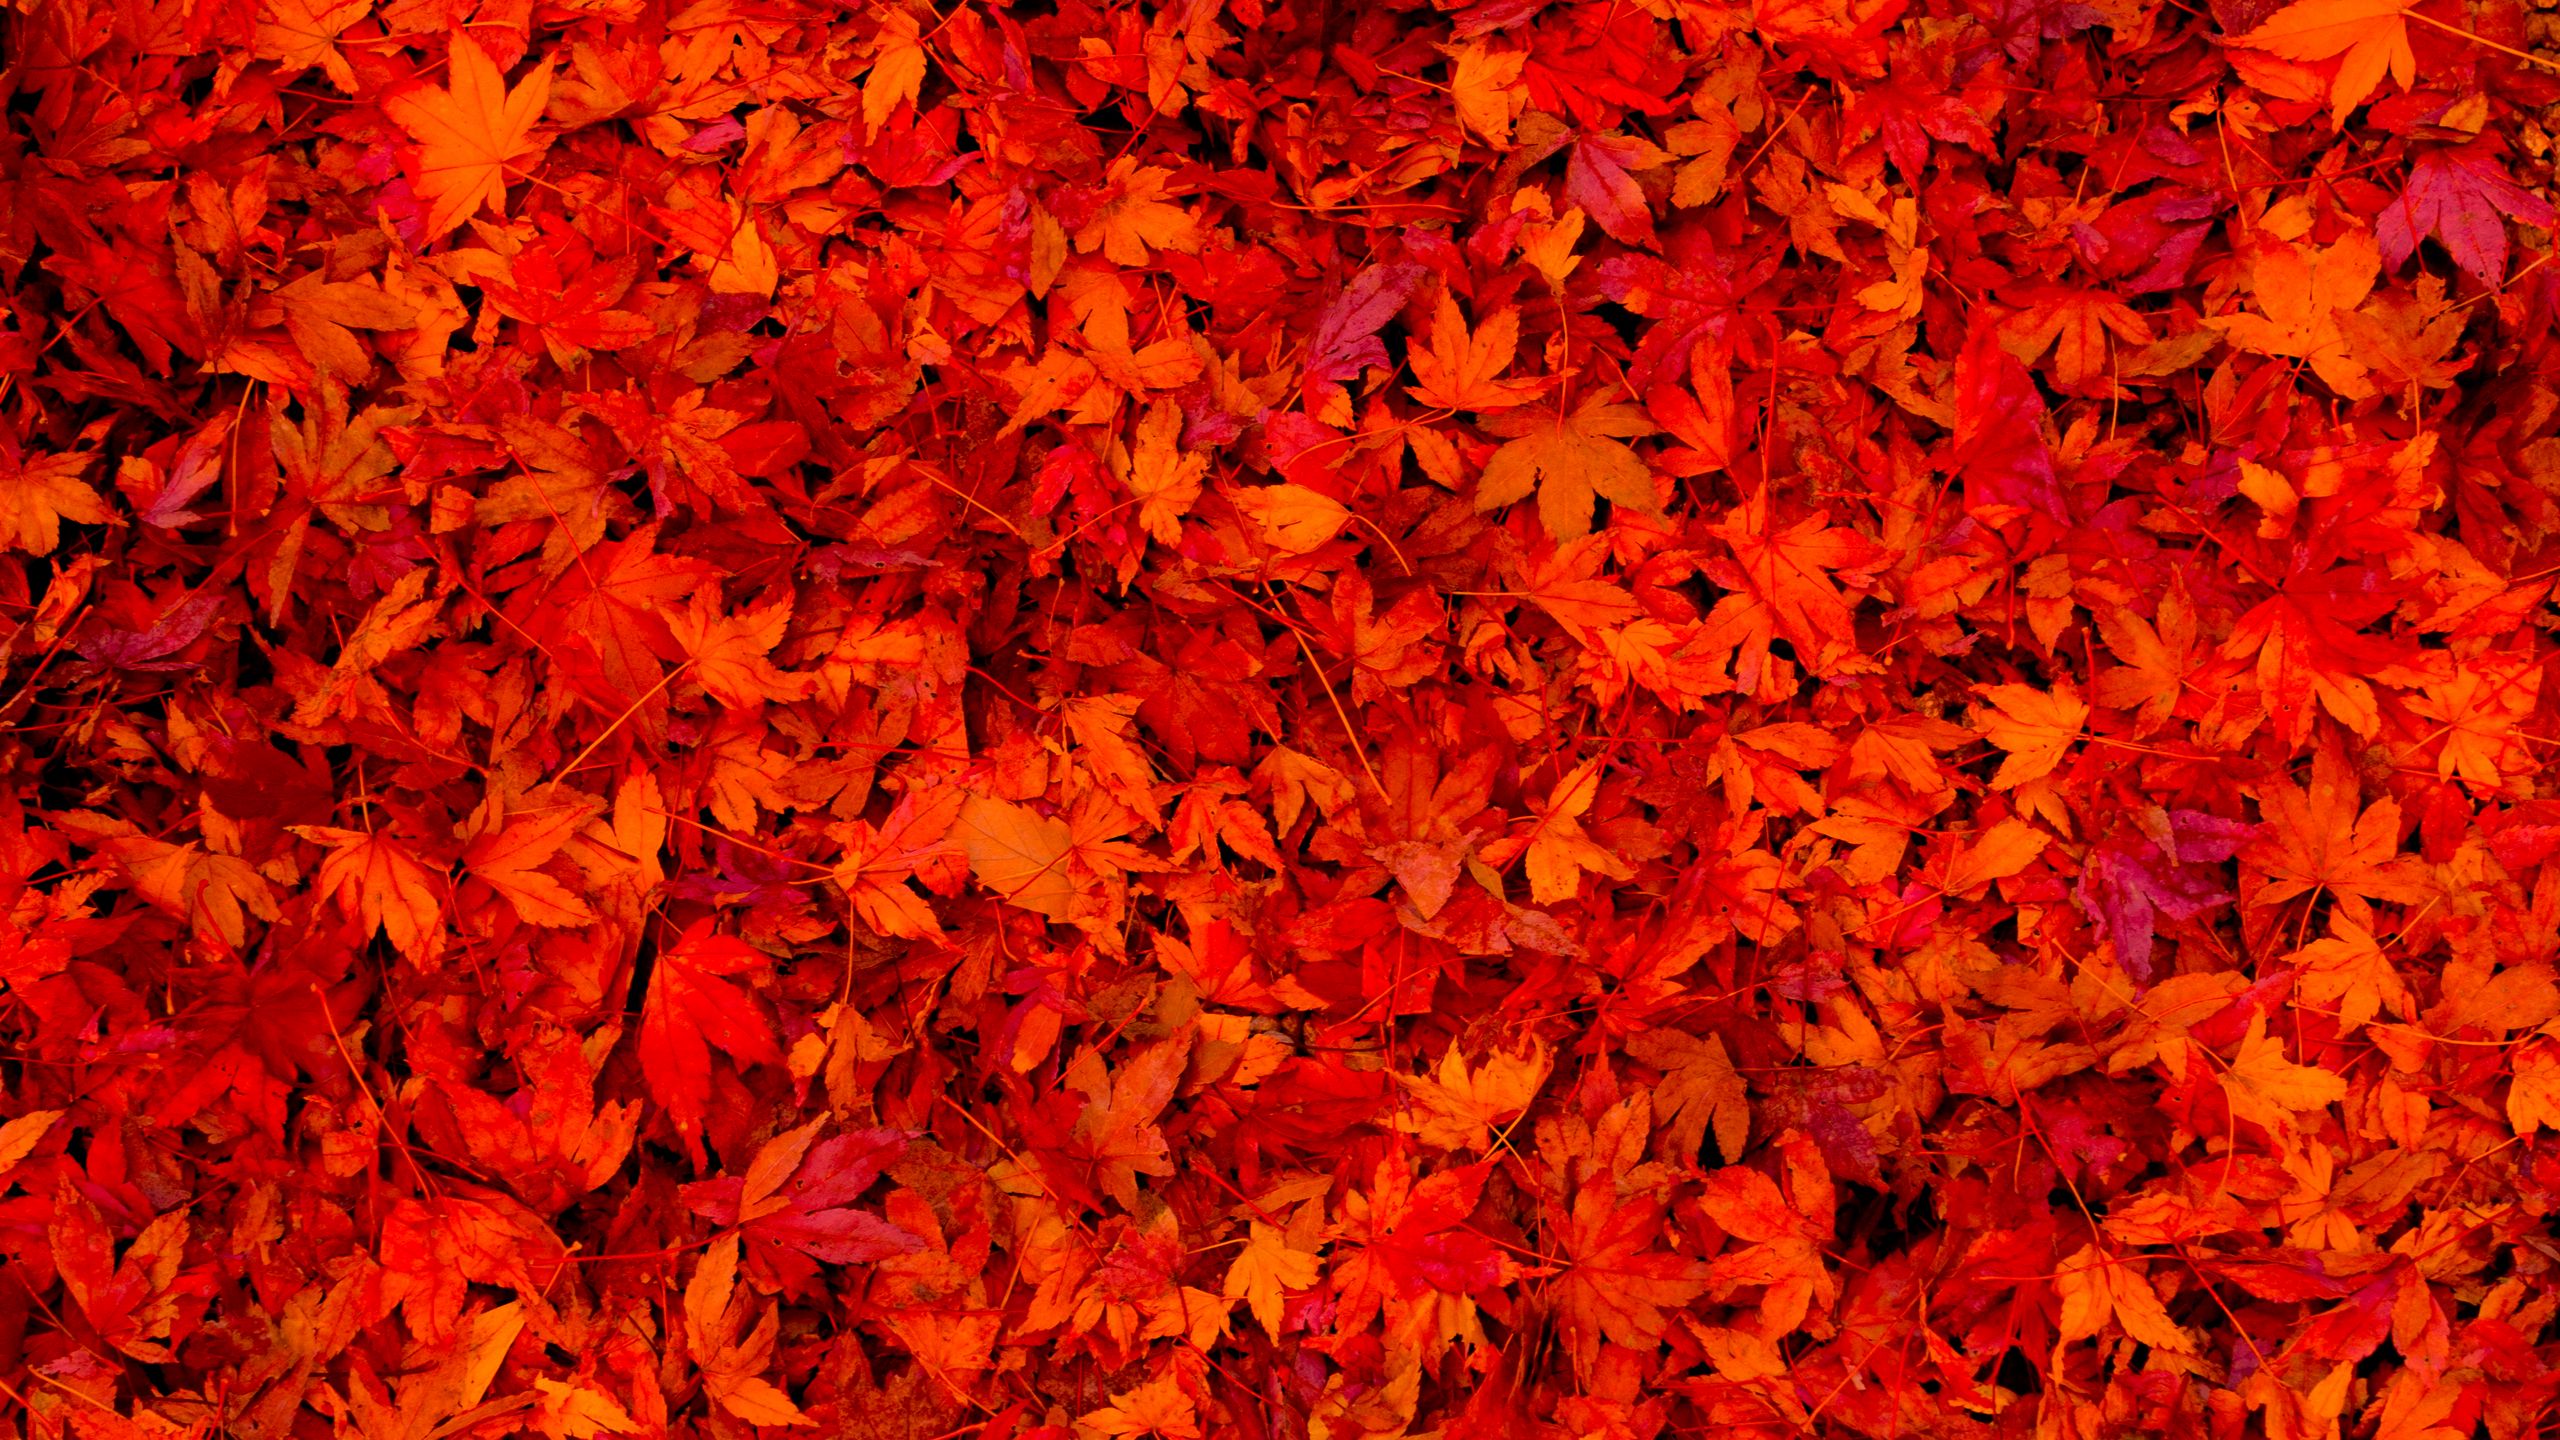 Download wallpaper 2560x1440 fallen leaves, leaves, red, bright